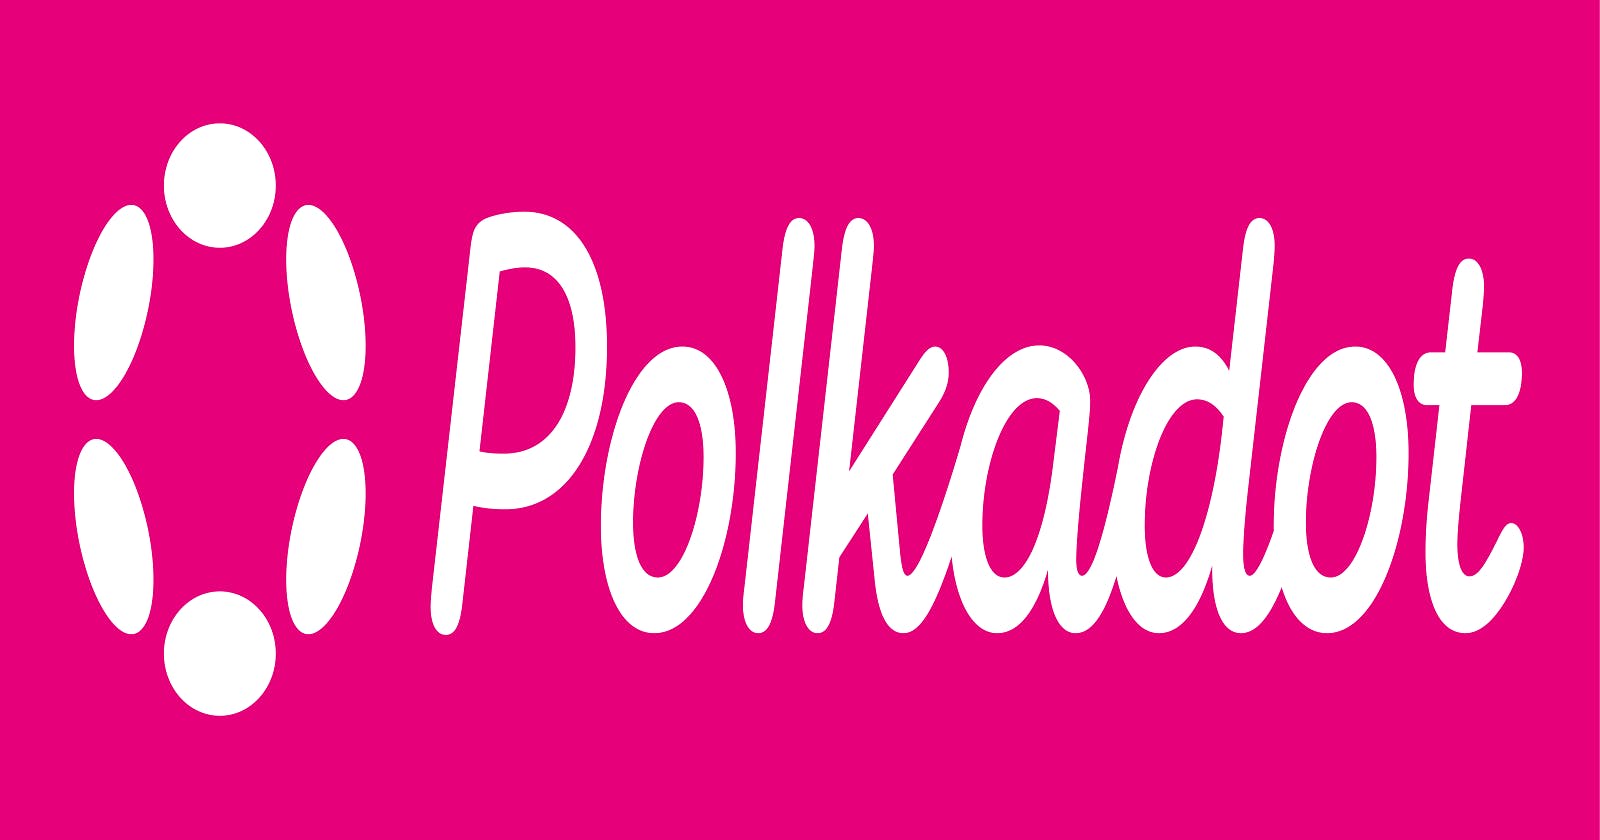 Major Upgrades for Polkadot Proposed (Repost of Official Newsletter)